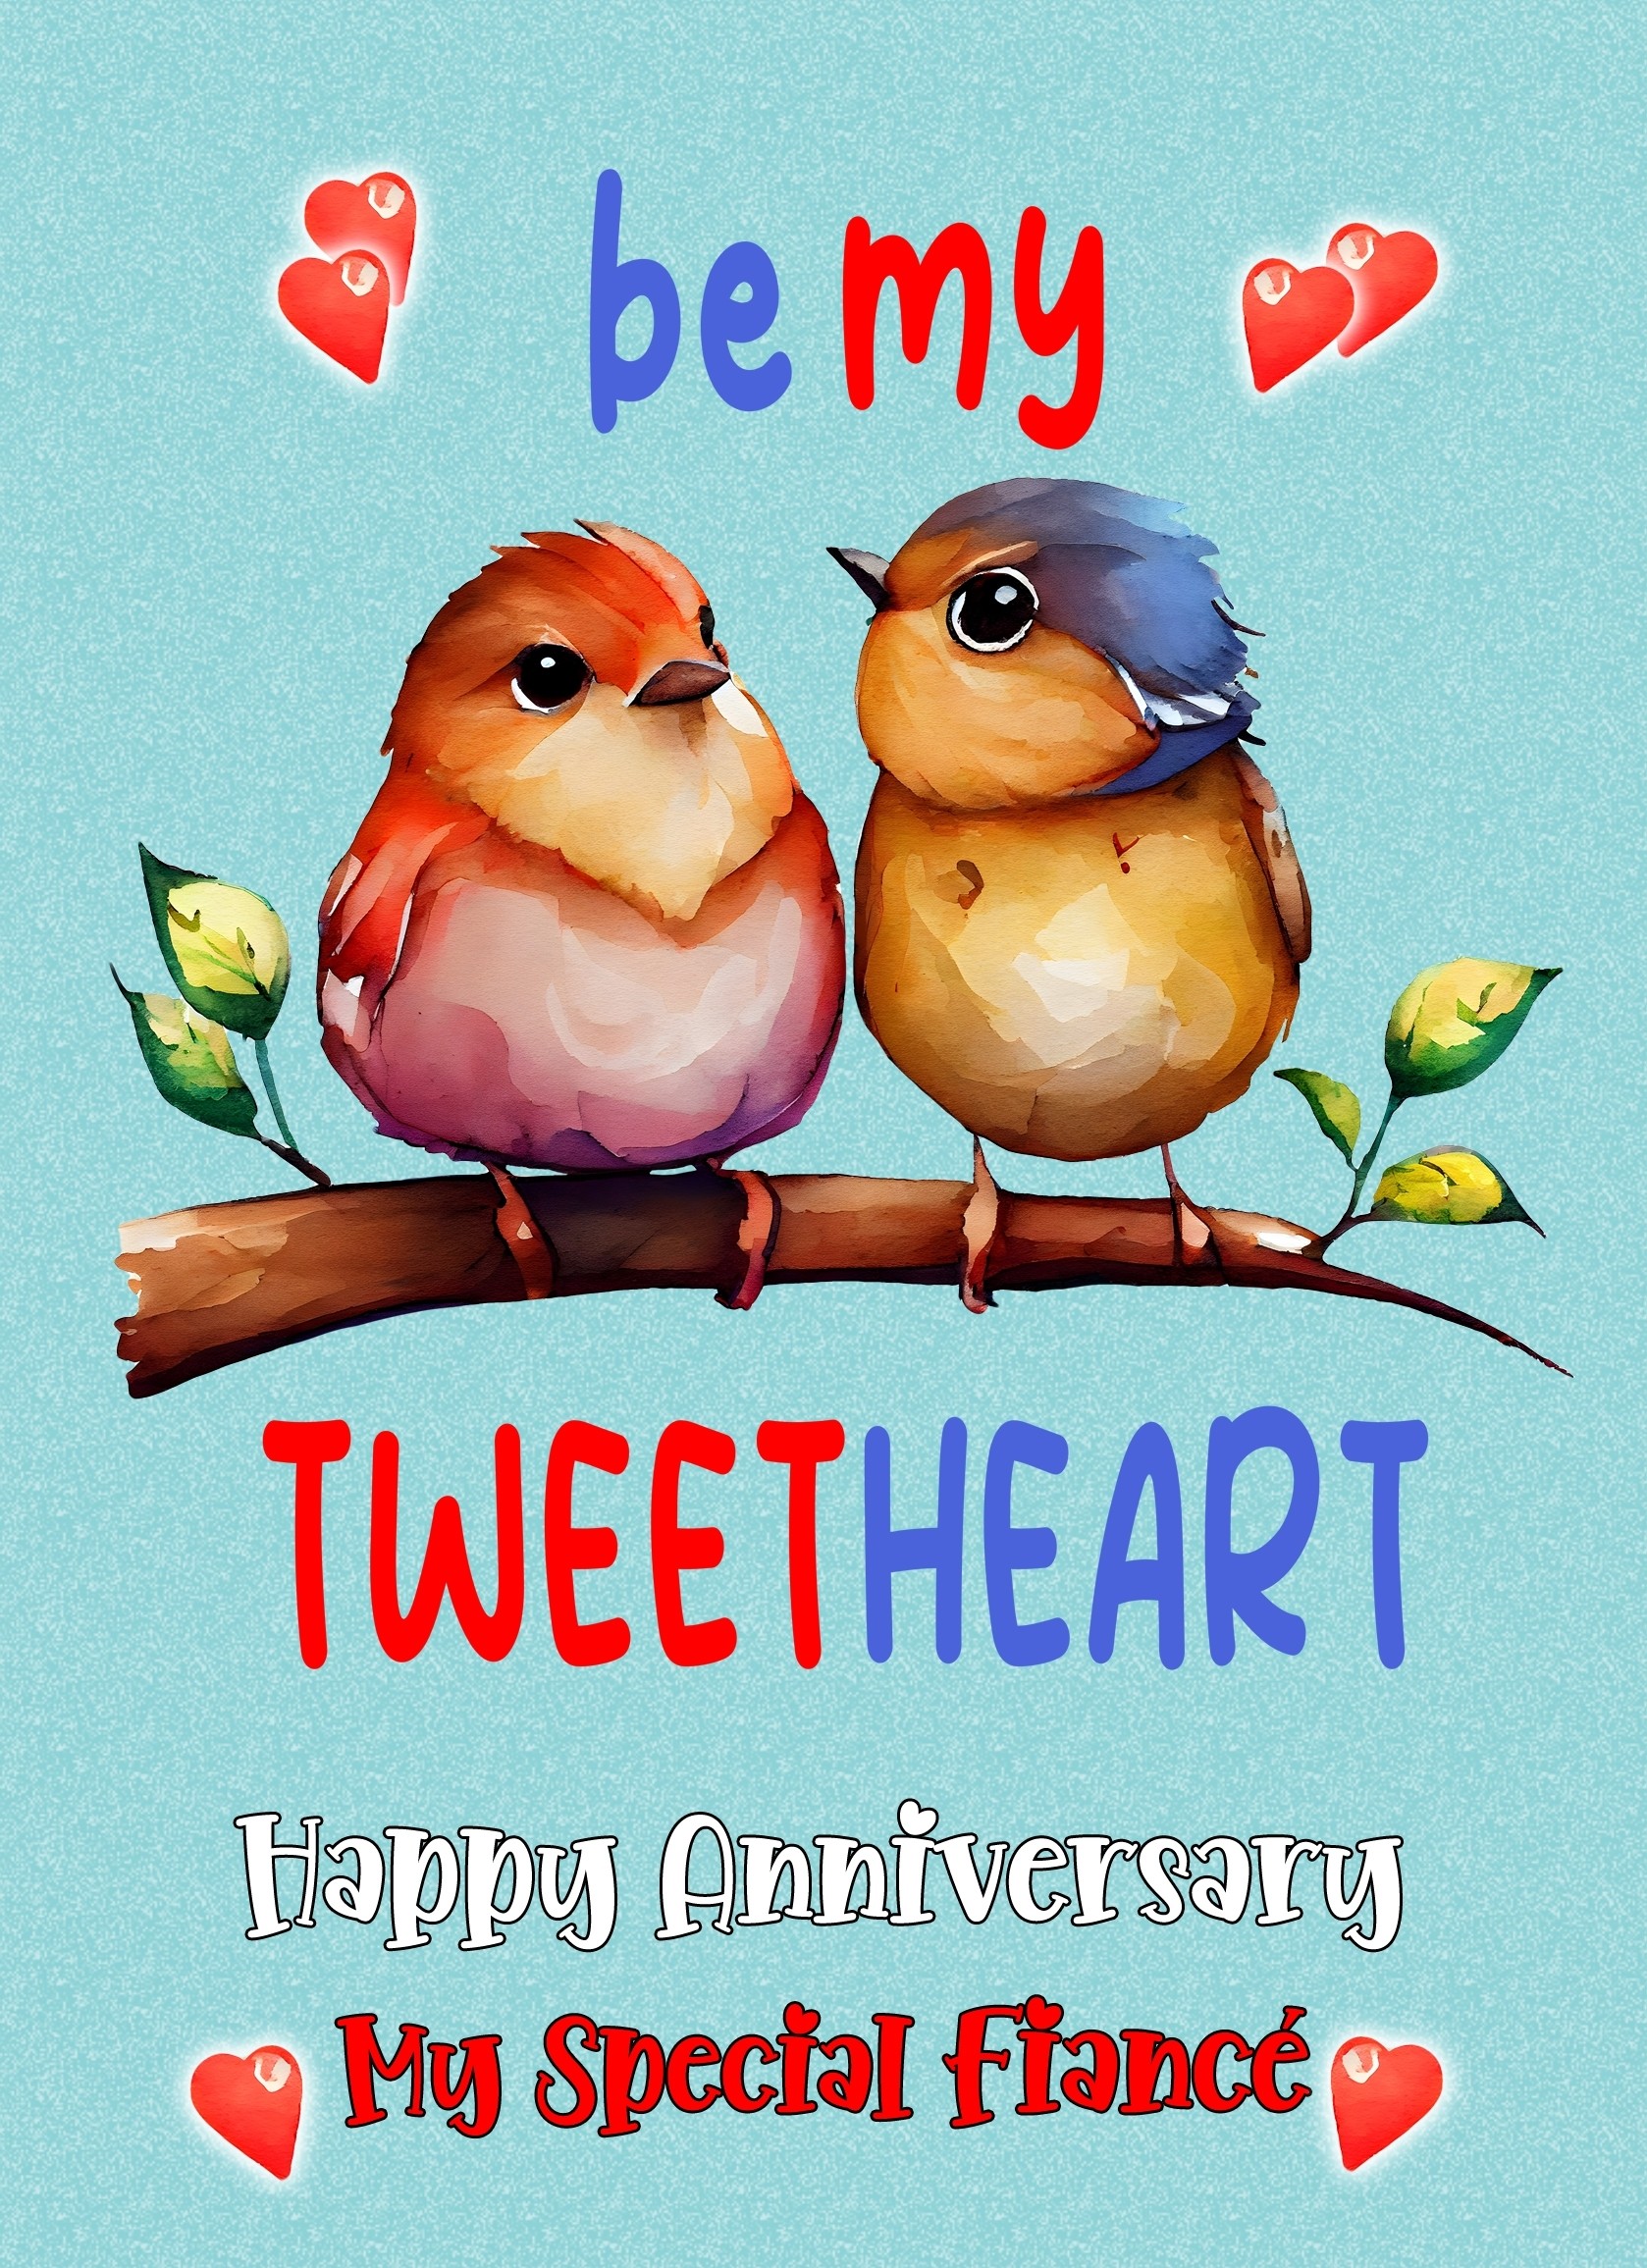 Funny Pun Romantic Anniversary Card for Fiance (Tweetheart)